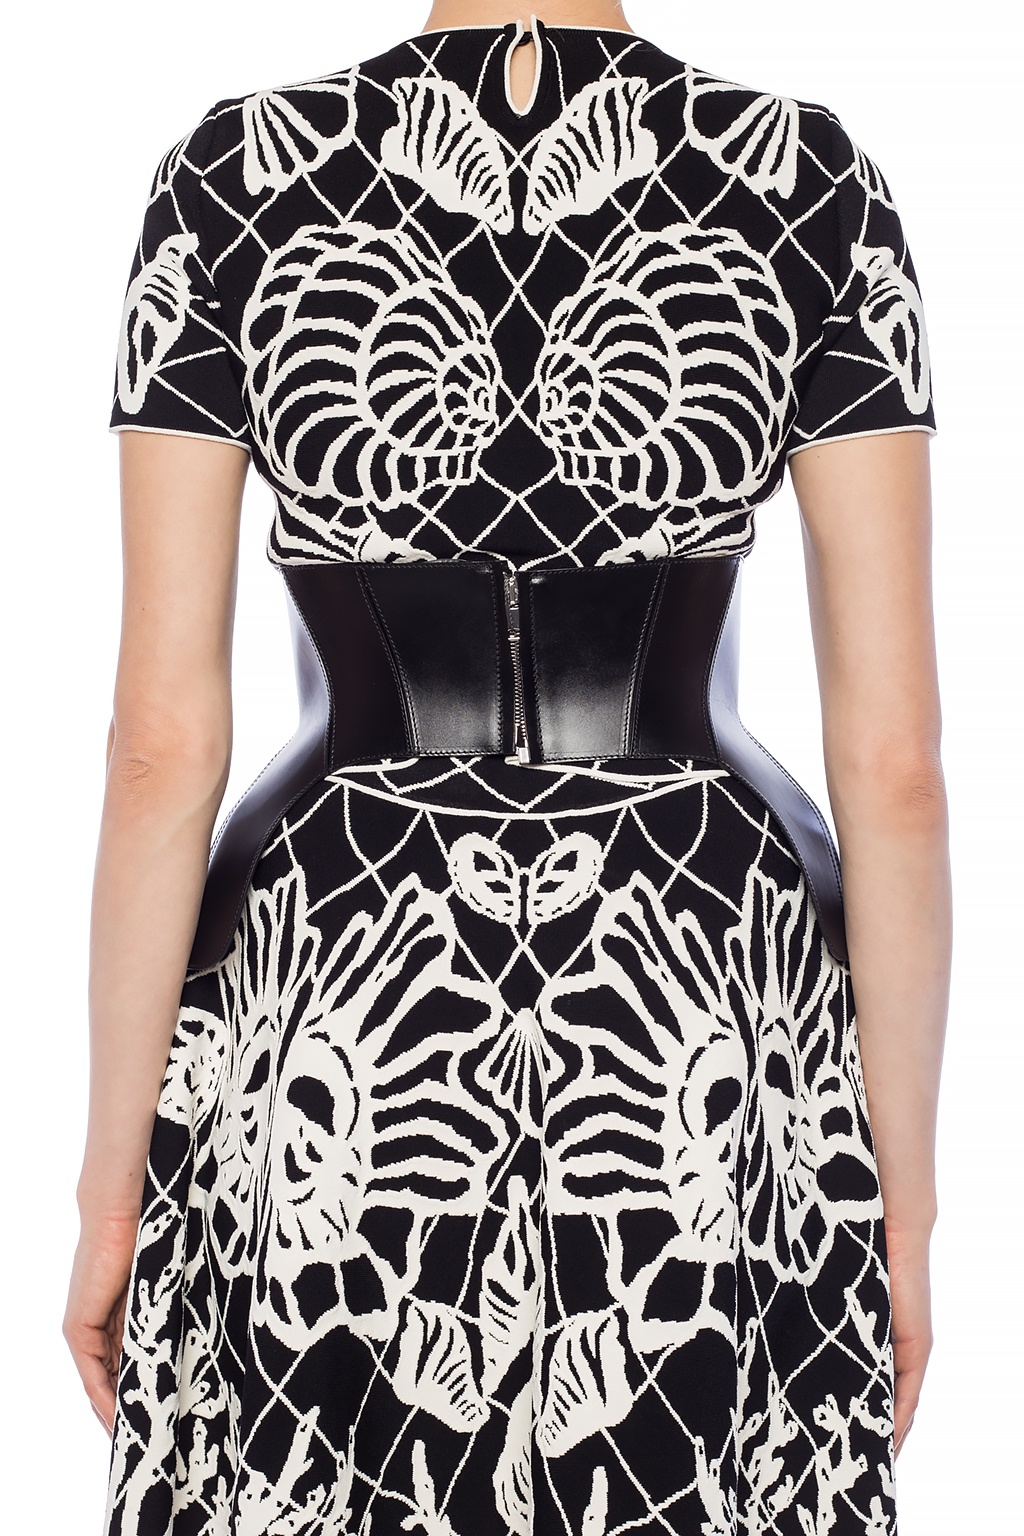 knotted-bow leather corset top, Alexander McQueen